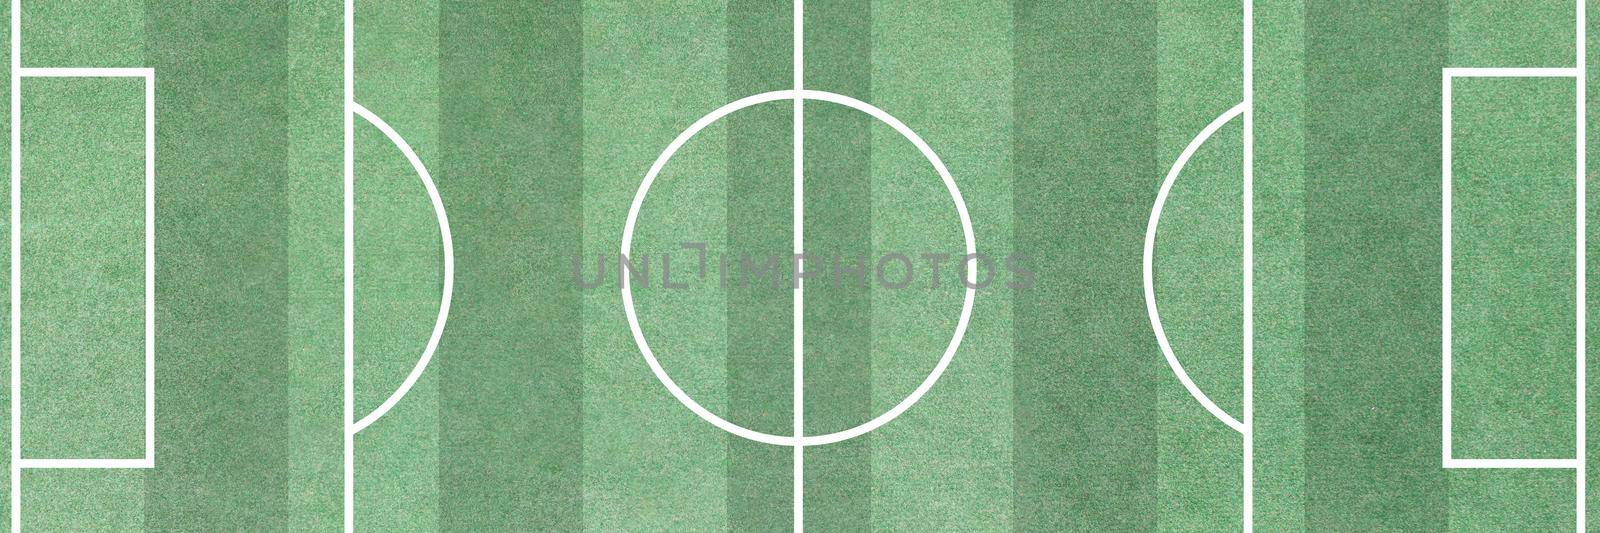 Football field with striped green grass background top view by kuprevich